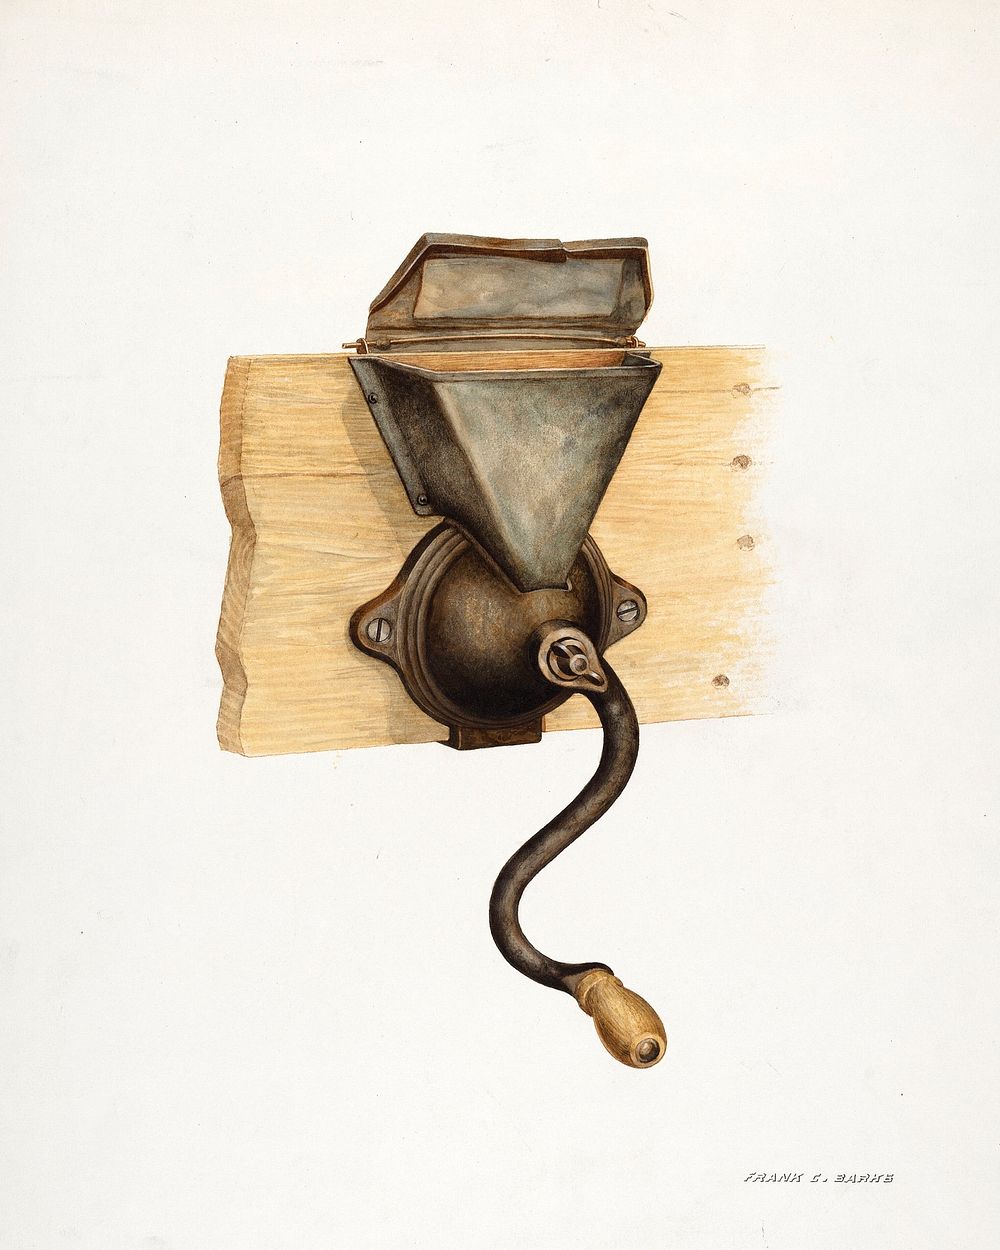 Coffee Mill (ca. 1937) by Frank C. Barks. Original from The National Gallery of Art. Digitally enhanced by rawpixel.